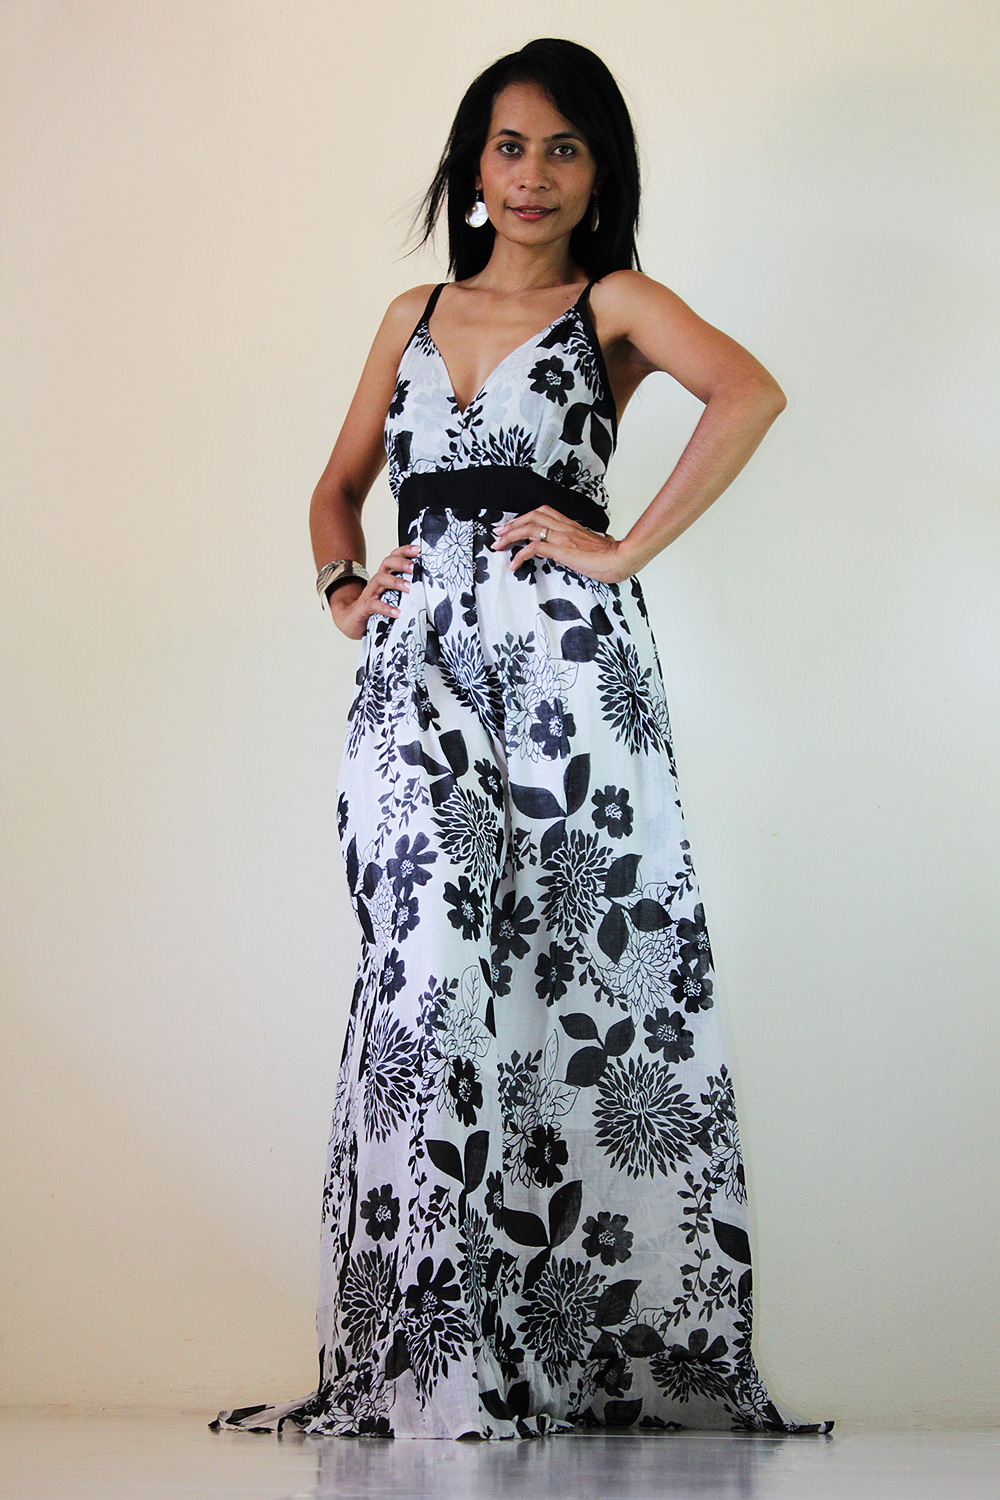 Floral Maxi Dress Black And White Summer Cotton Cute V Neck : Sweetie ...